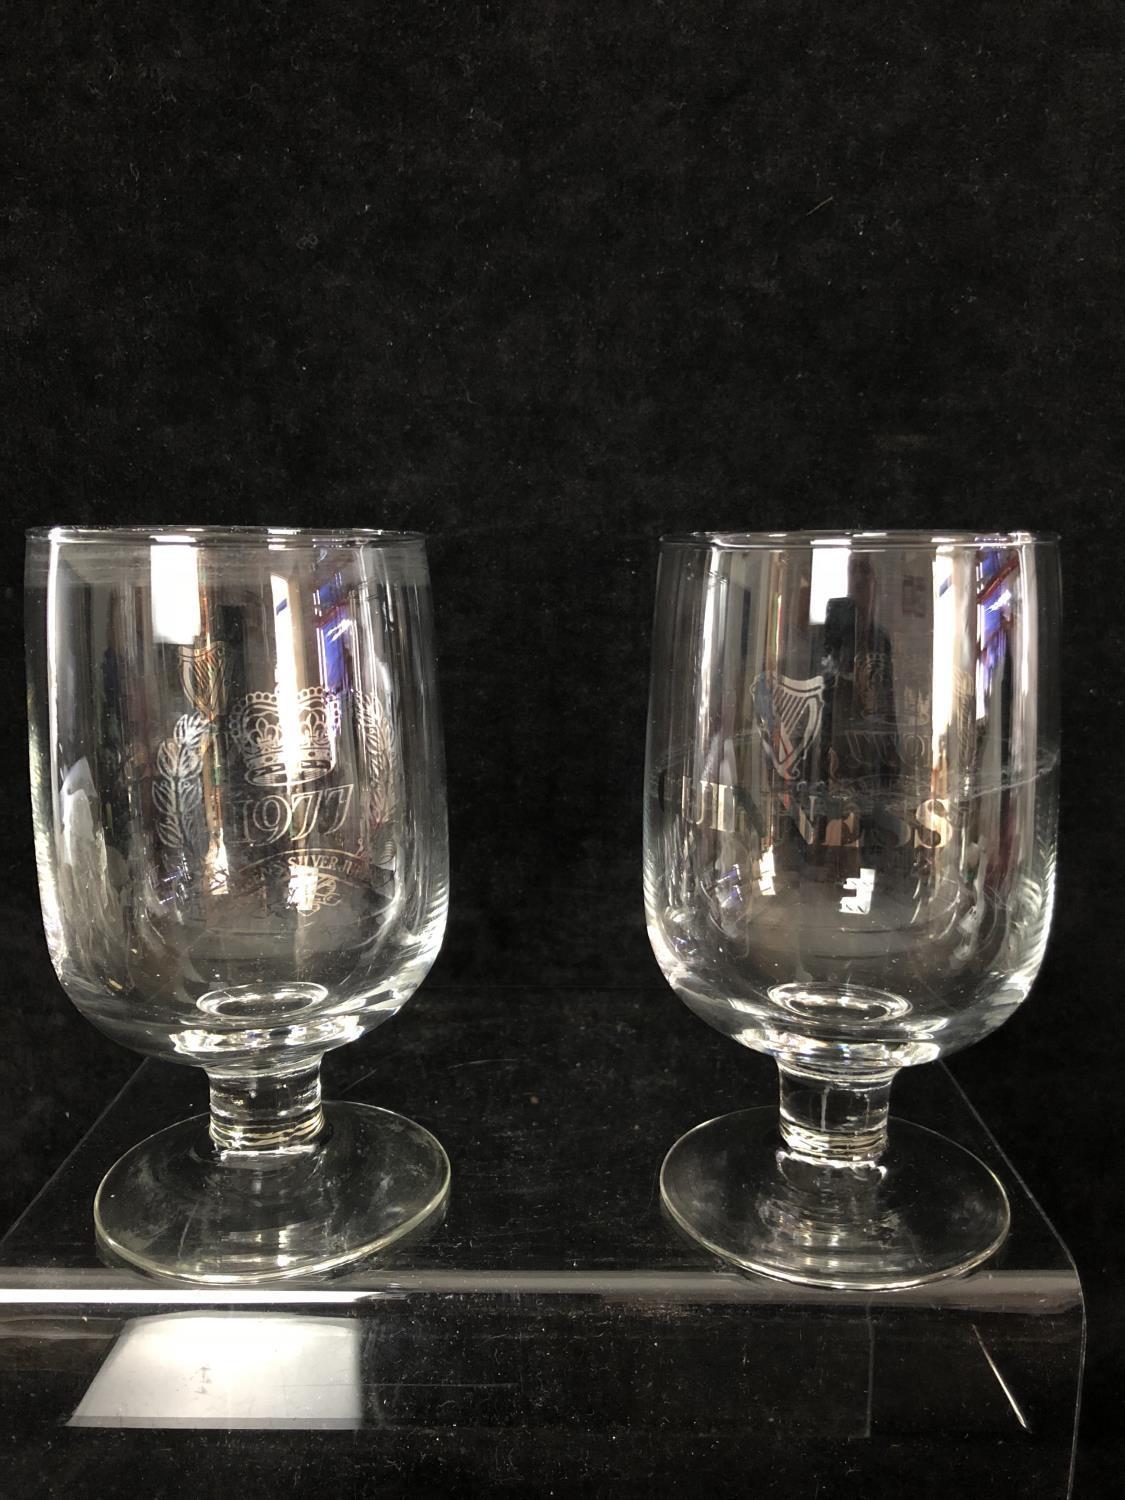 Guiness commemorative items - Comprising two three handled tygs, for The Guiness Year 1983 / - Image 6 of 11